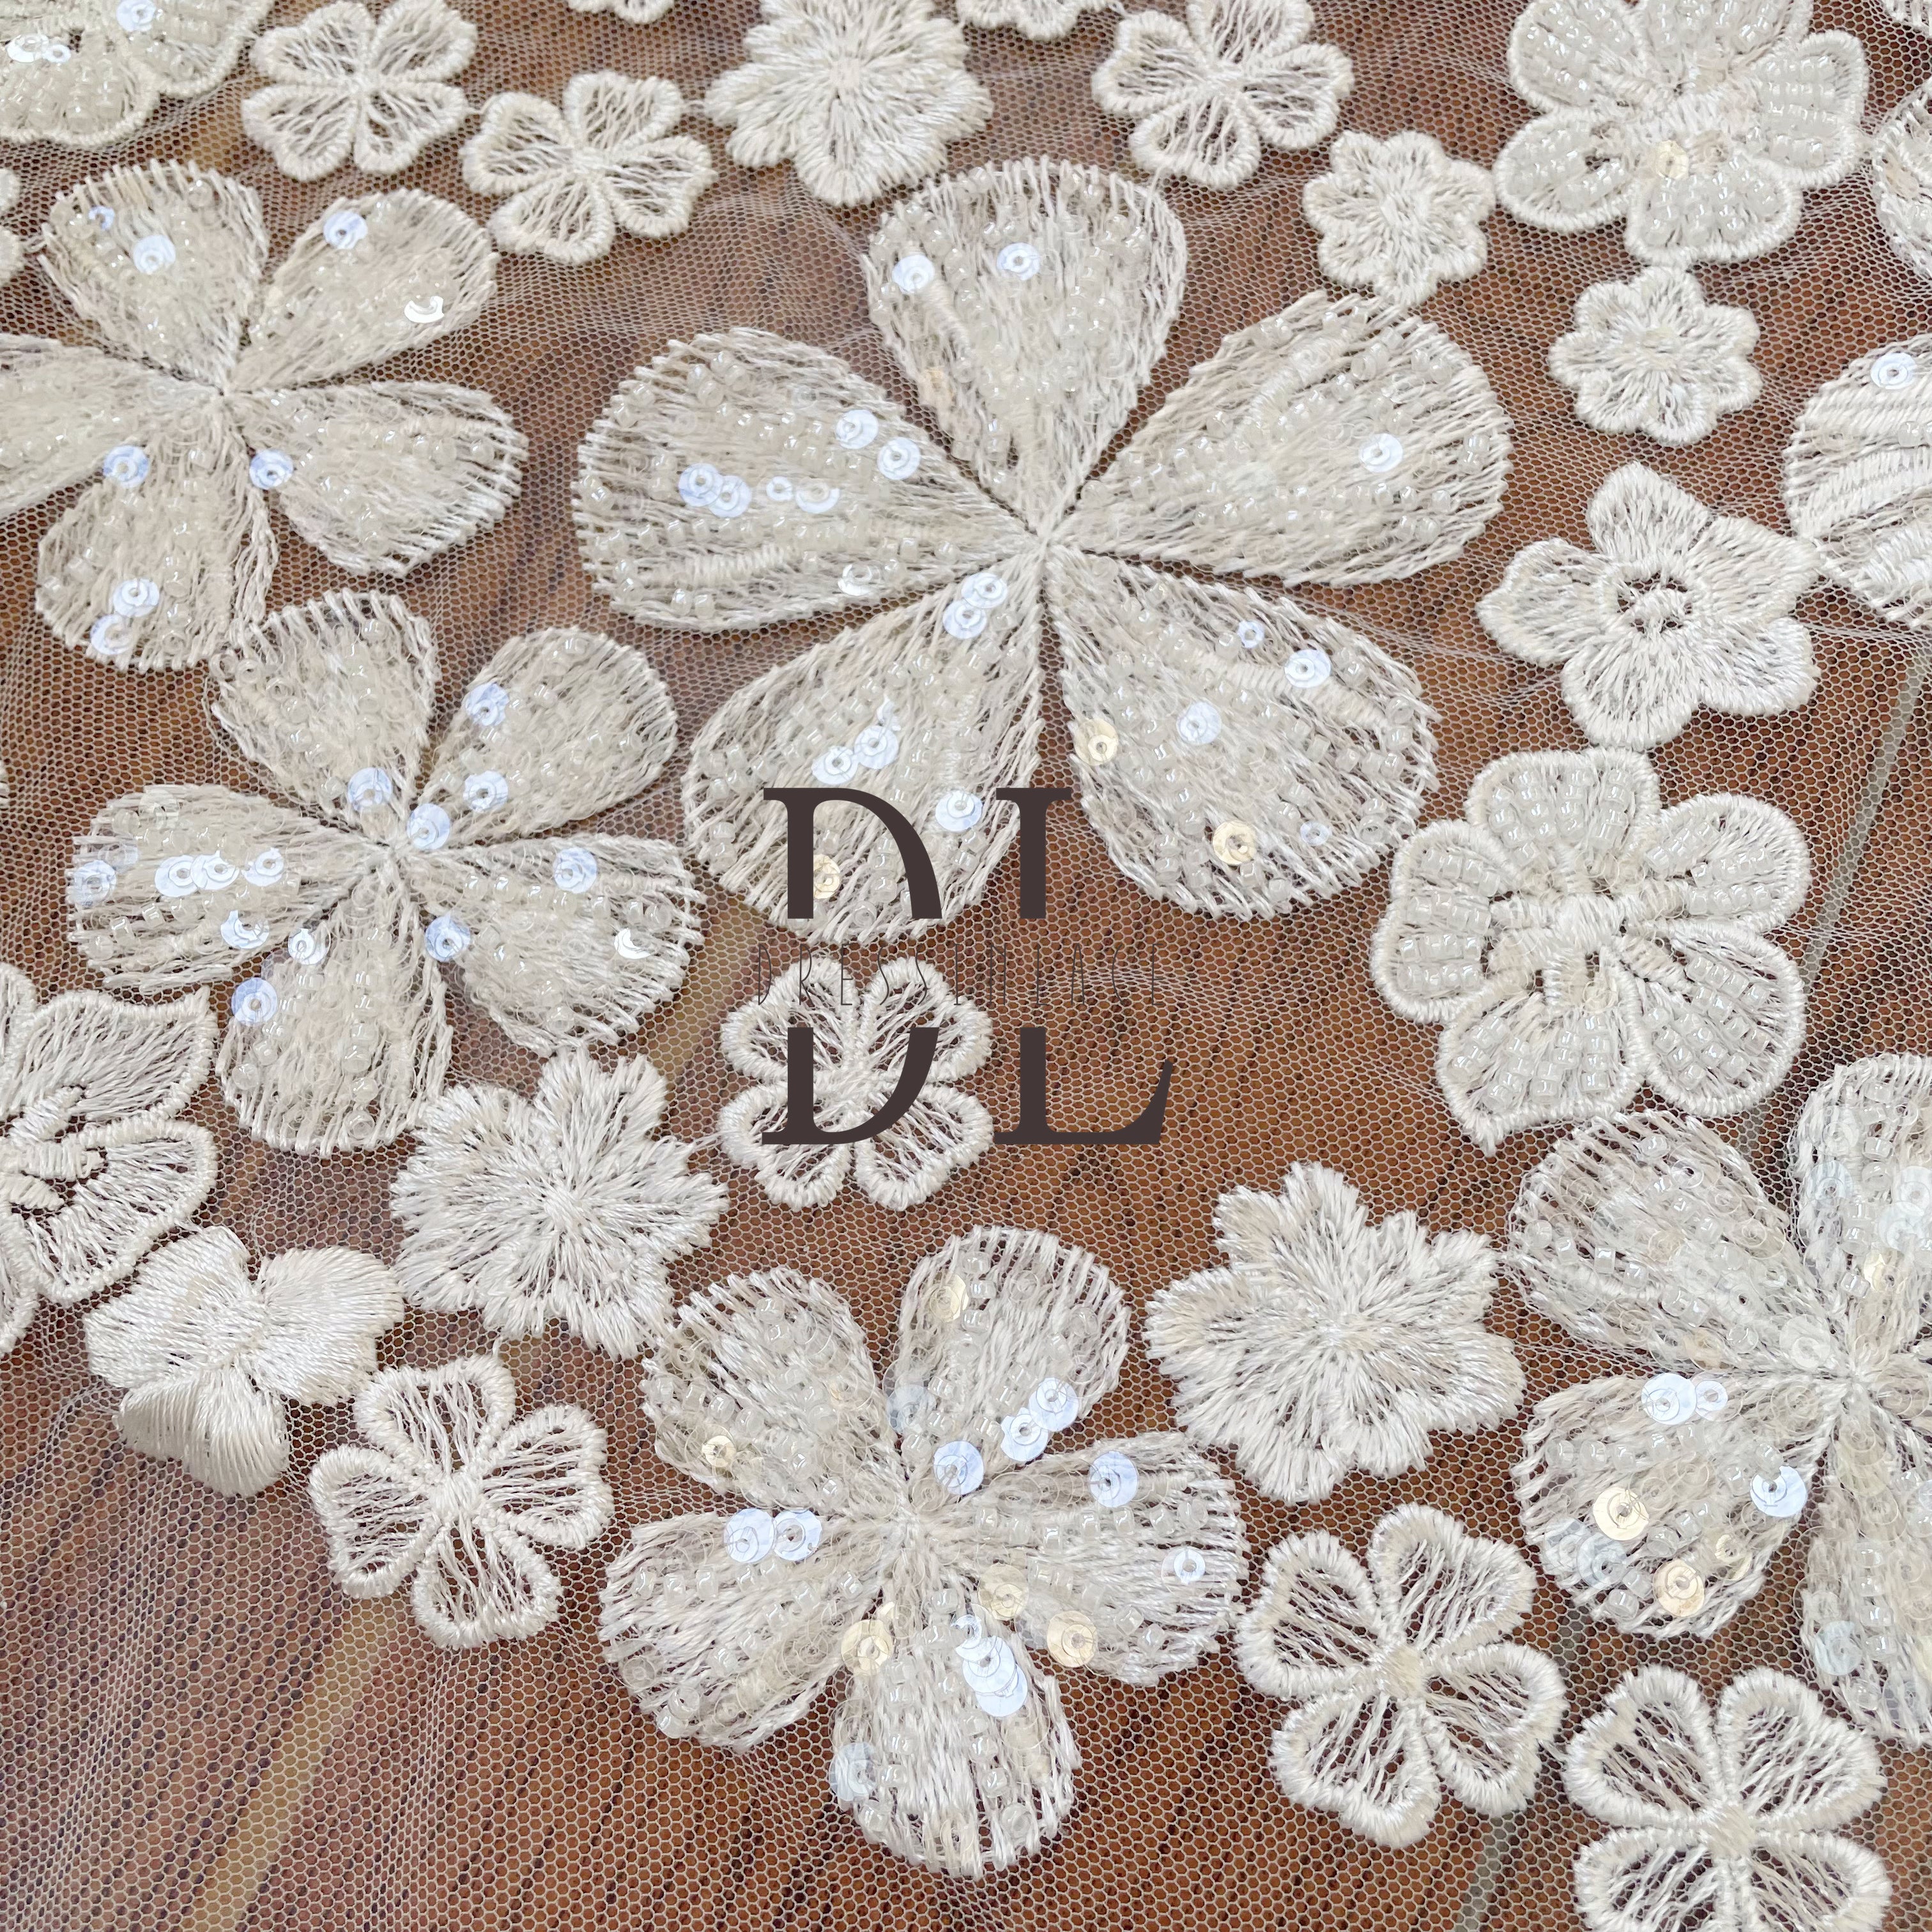 DL130145 Elegant Embroidery Lace Fabric with beads and sequins for creating stunning wedding dresses